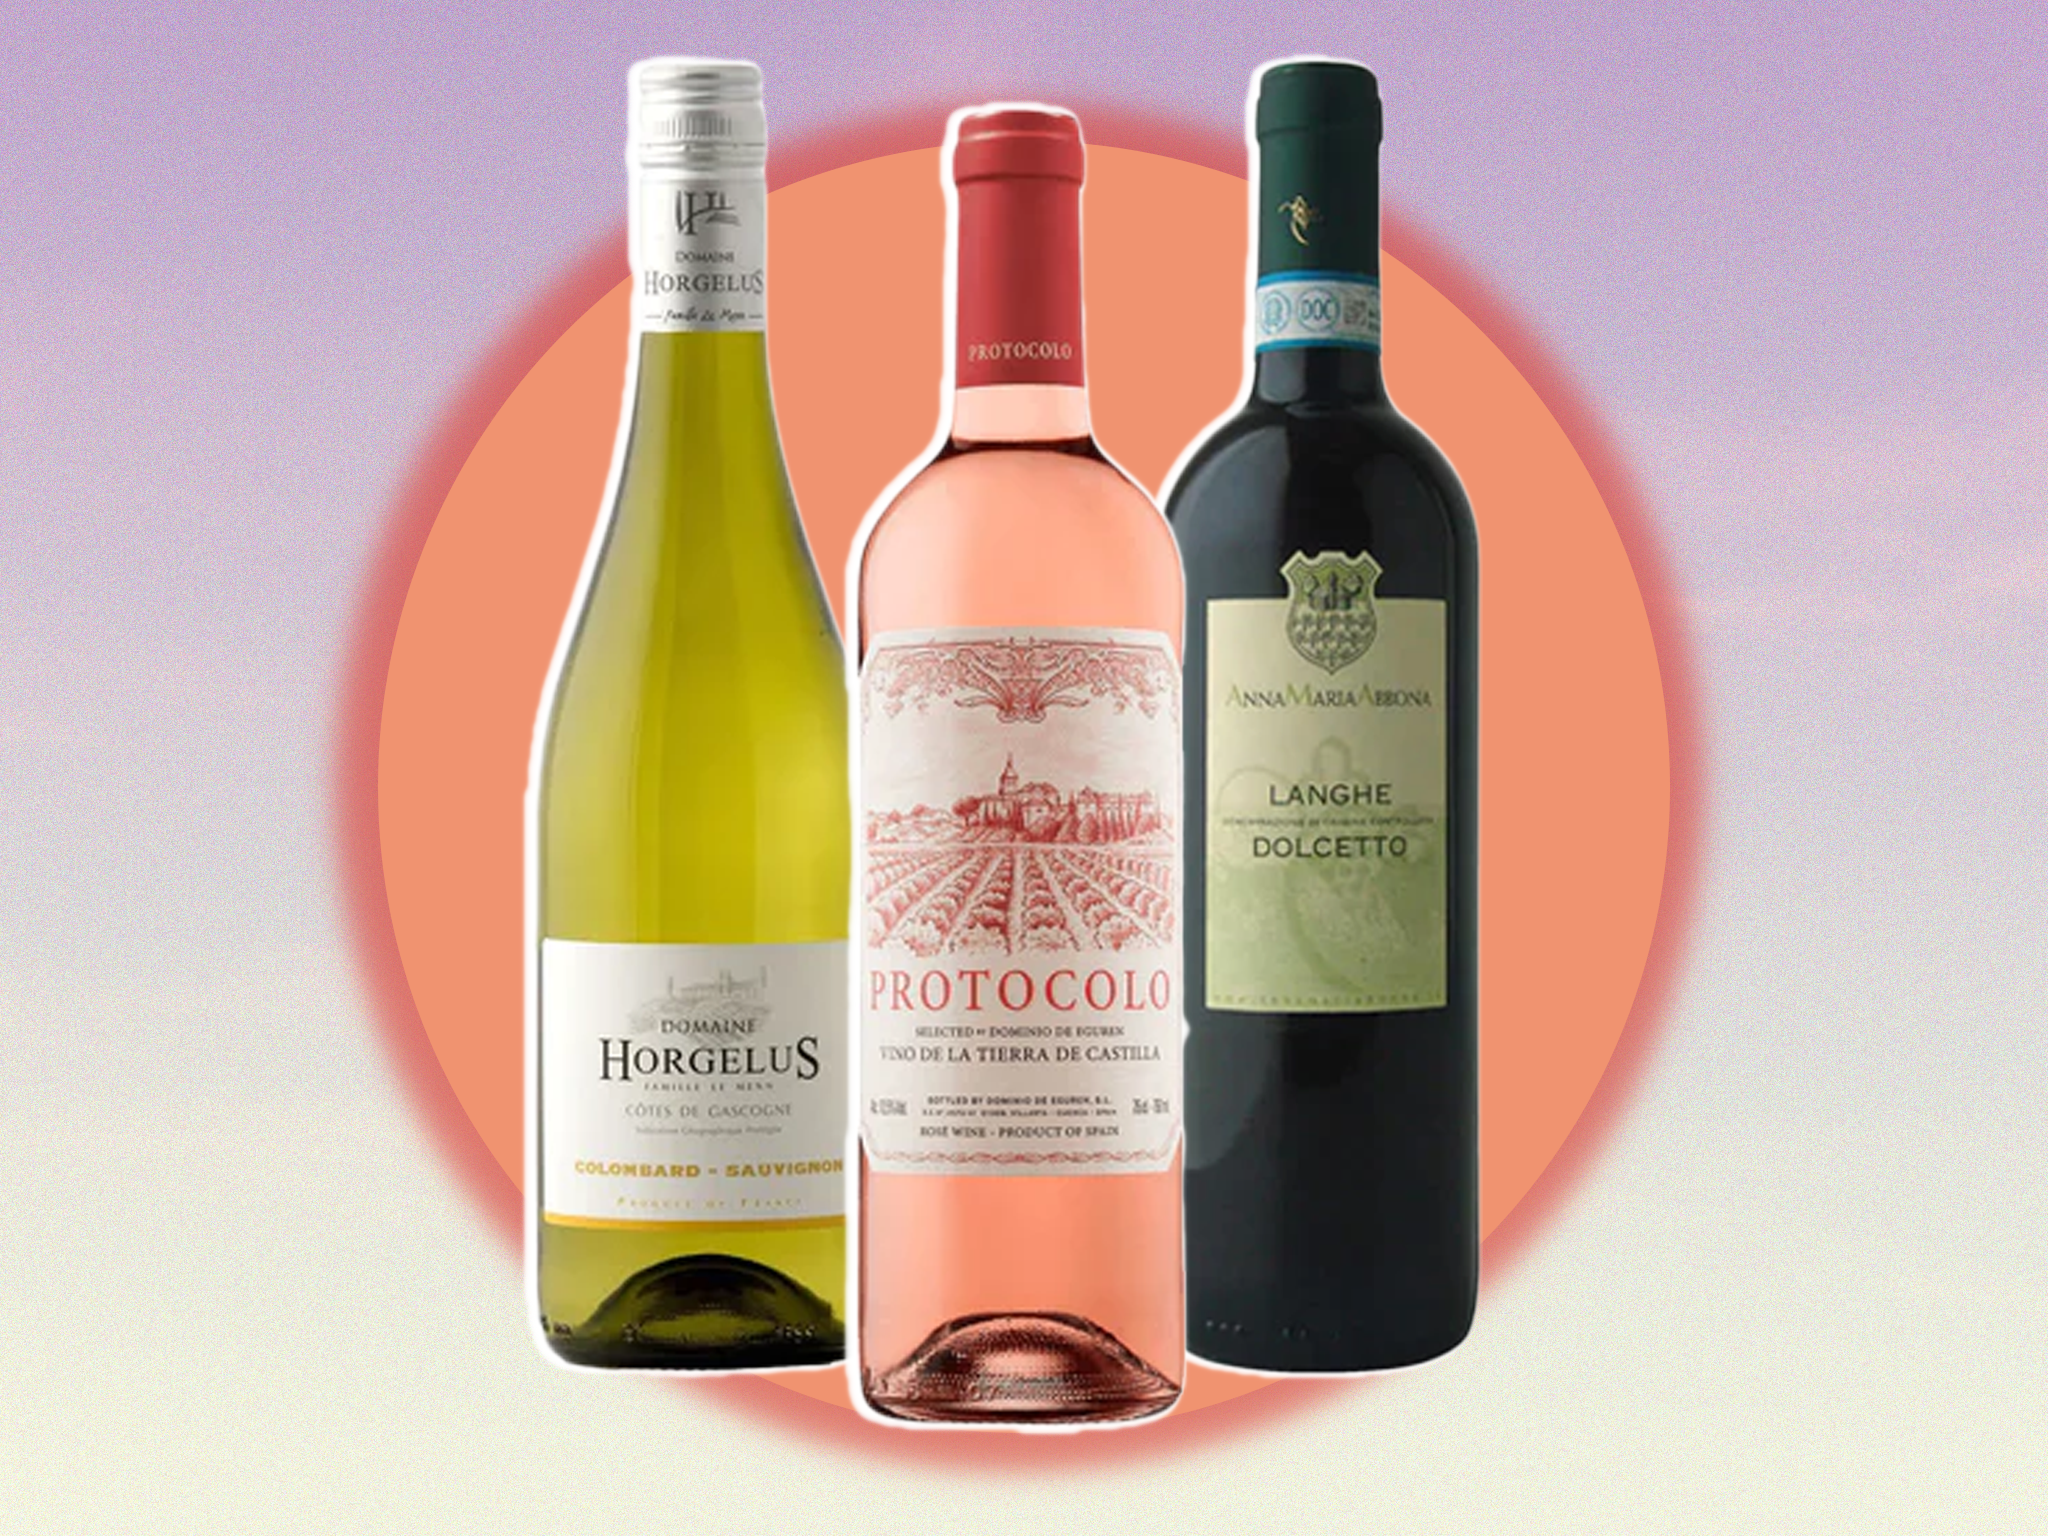 This mixed selection includes white, red and rosé wines